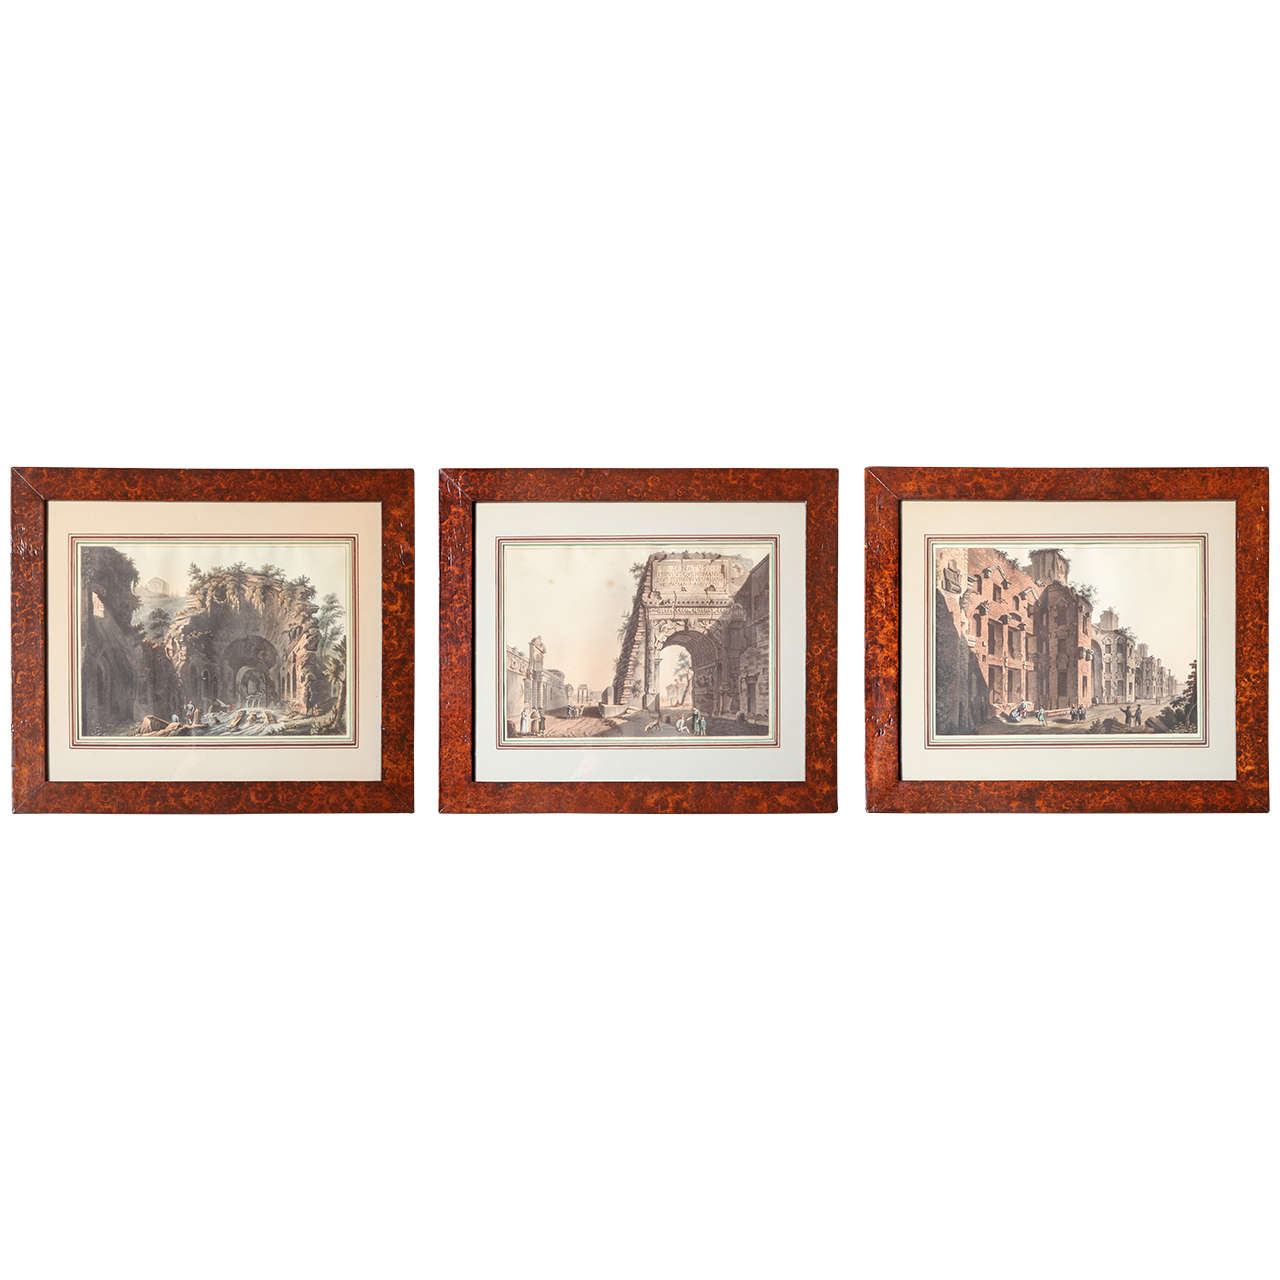 A Set of 3 Hand Colored Engraving Depicting Italian Ruins, Faux Bois Frame. For Sale